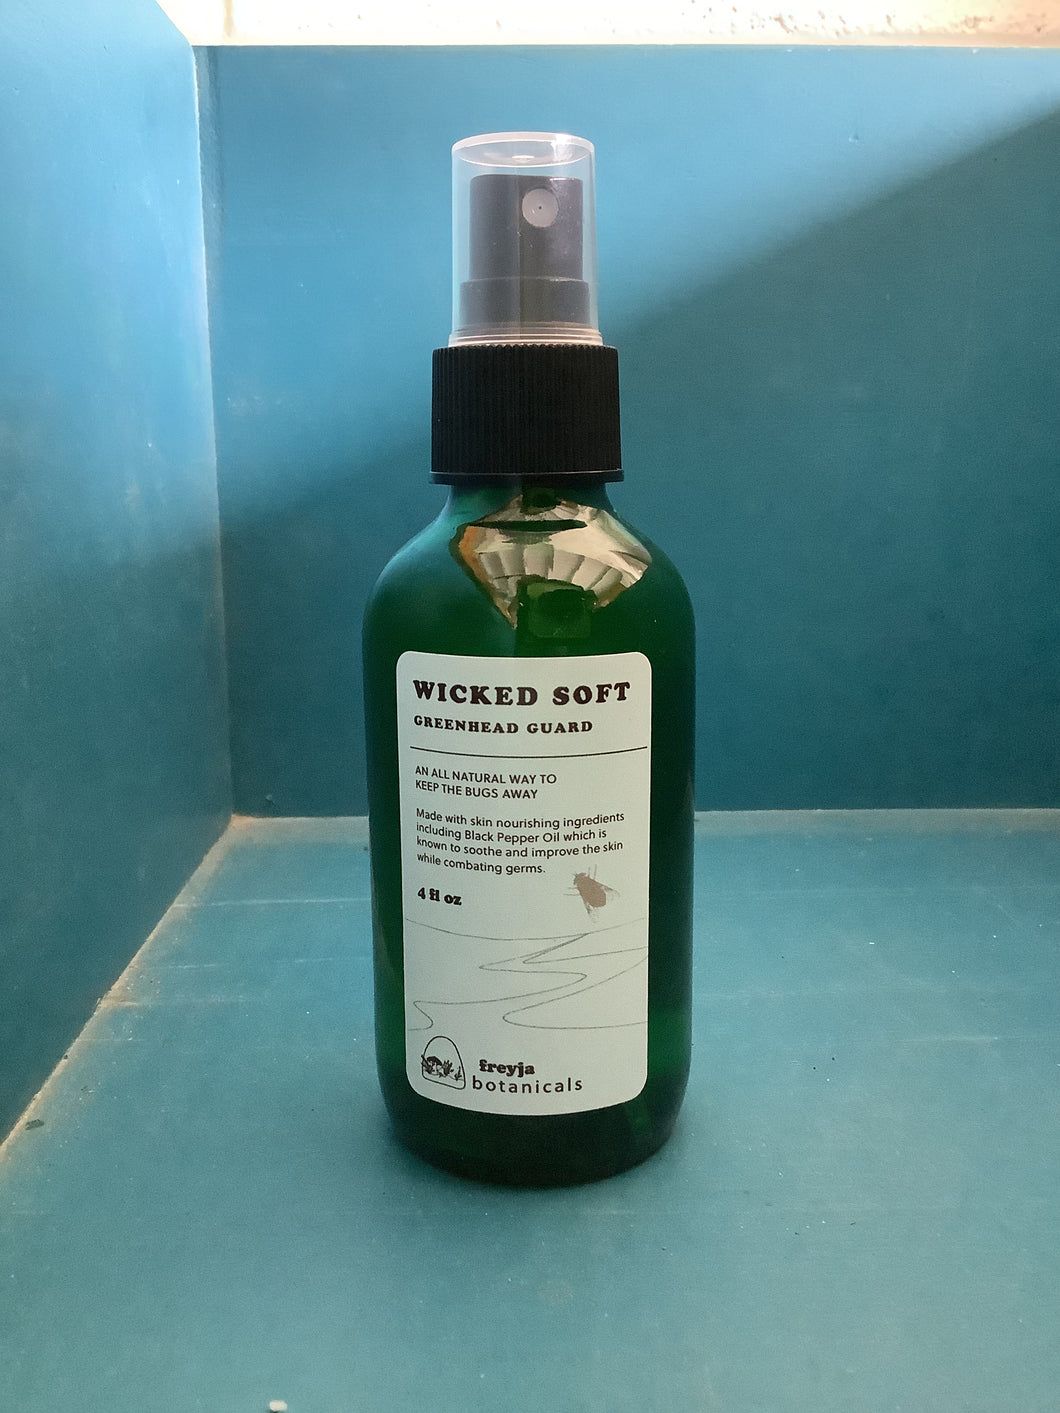 Wicked Soft All Natural Bug Spray